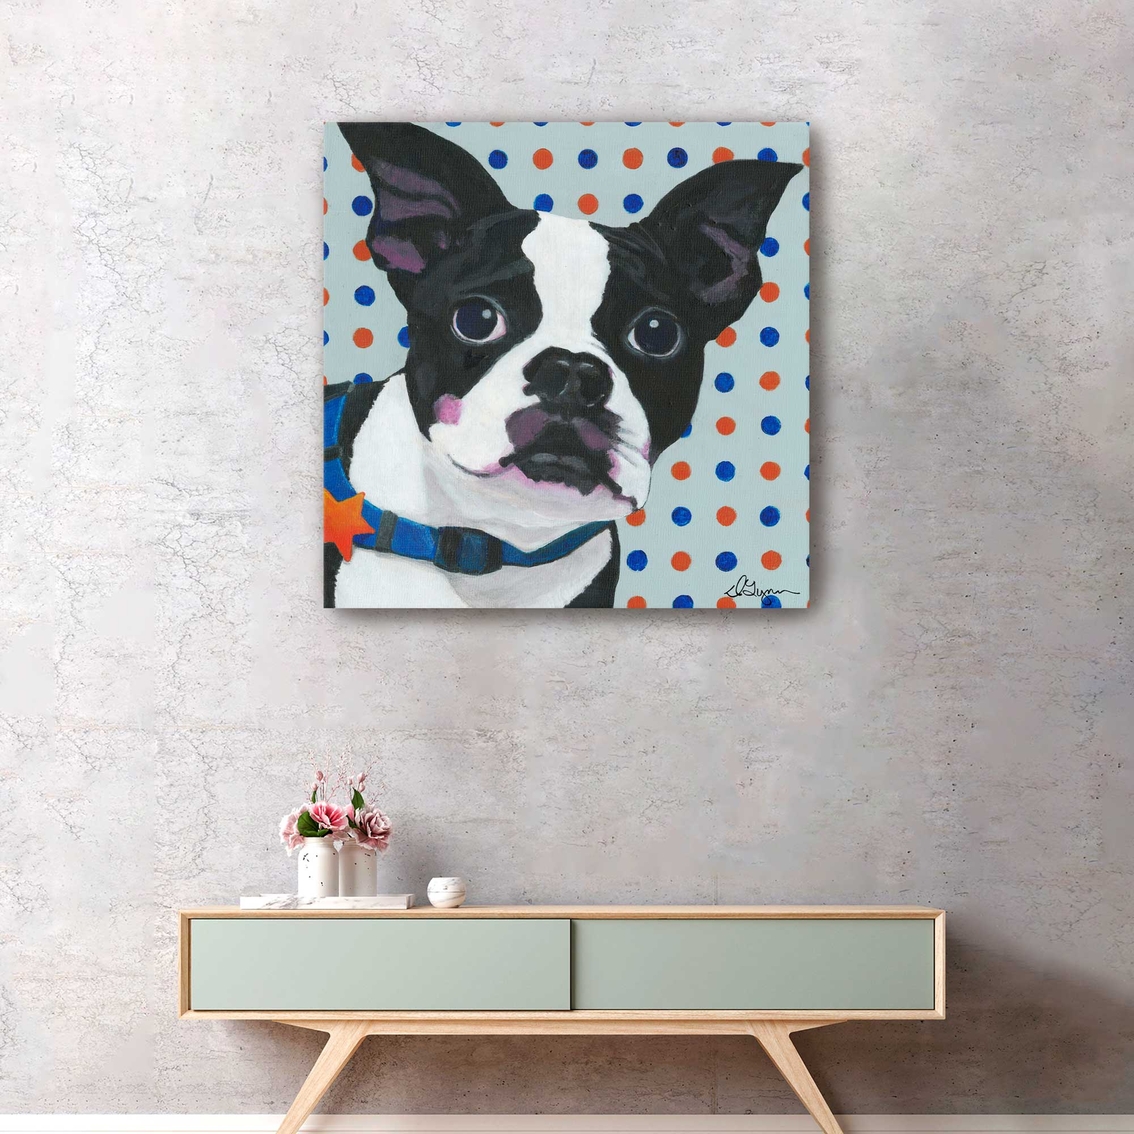 Inkstry Dlynns Dogs Diesel Canvas Wrapped Giclee Art - Image 3 of 3